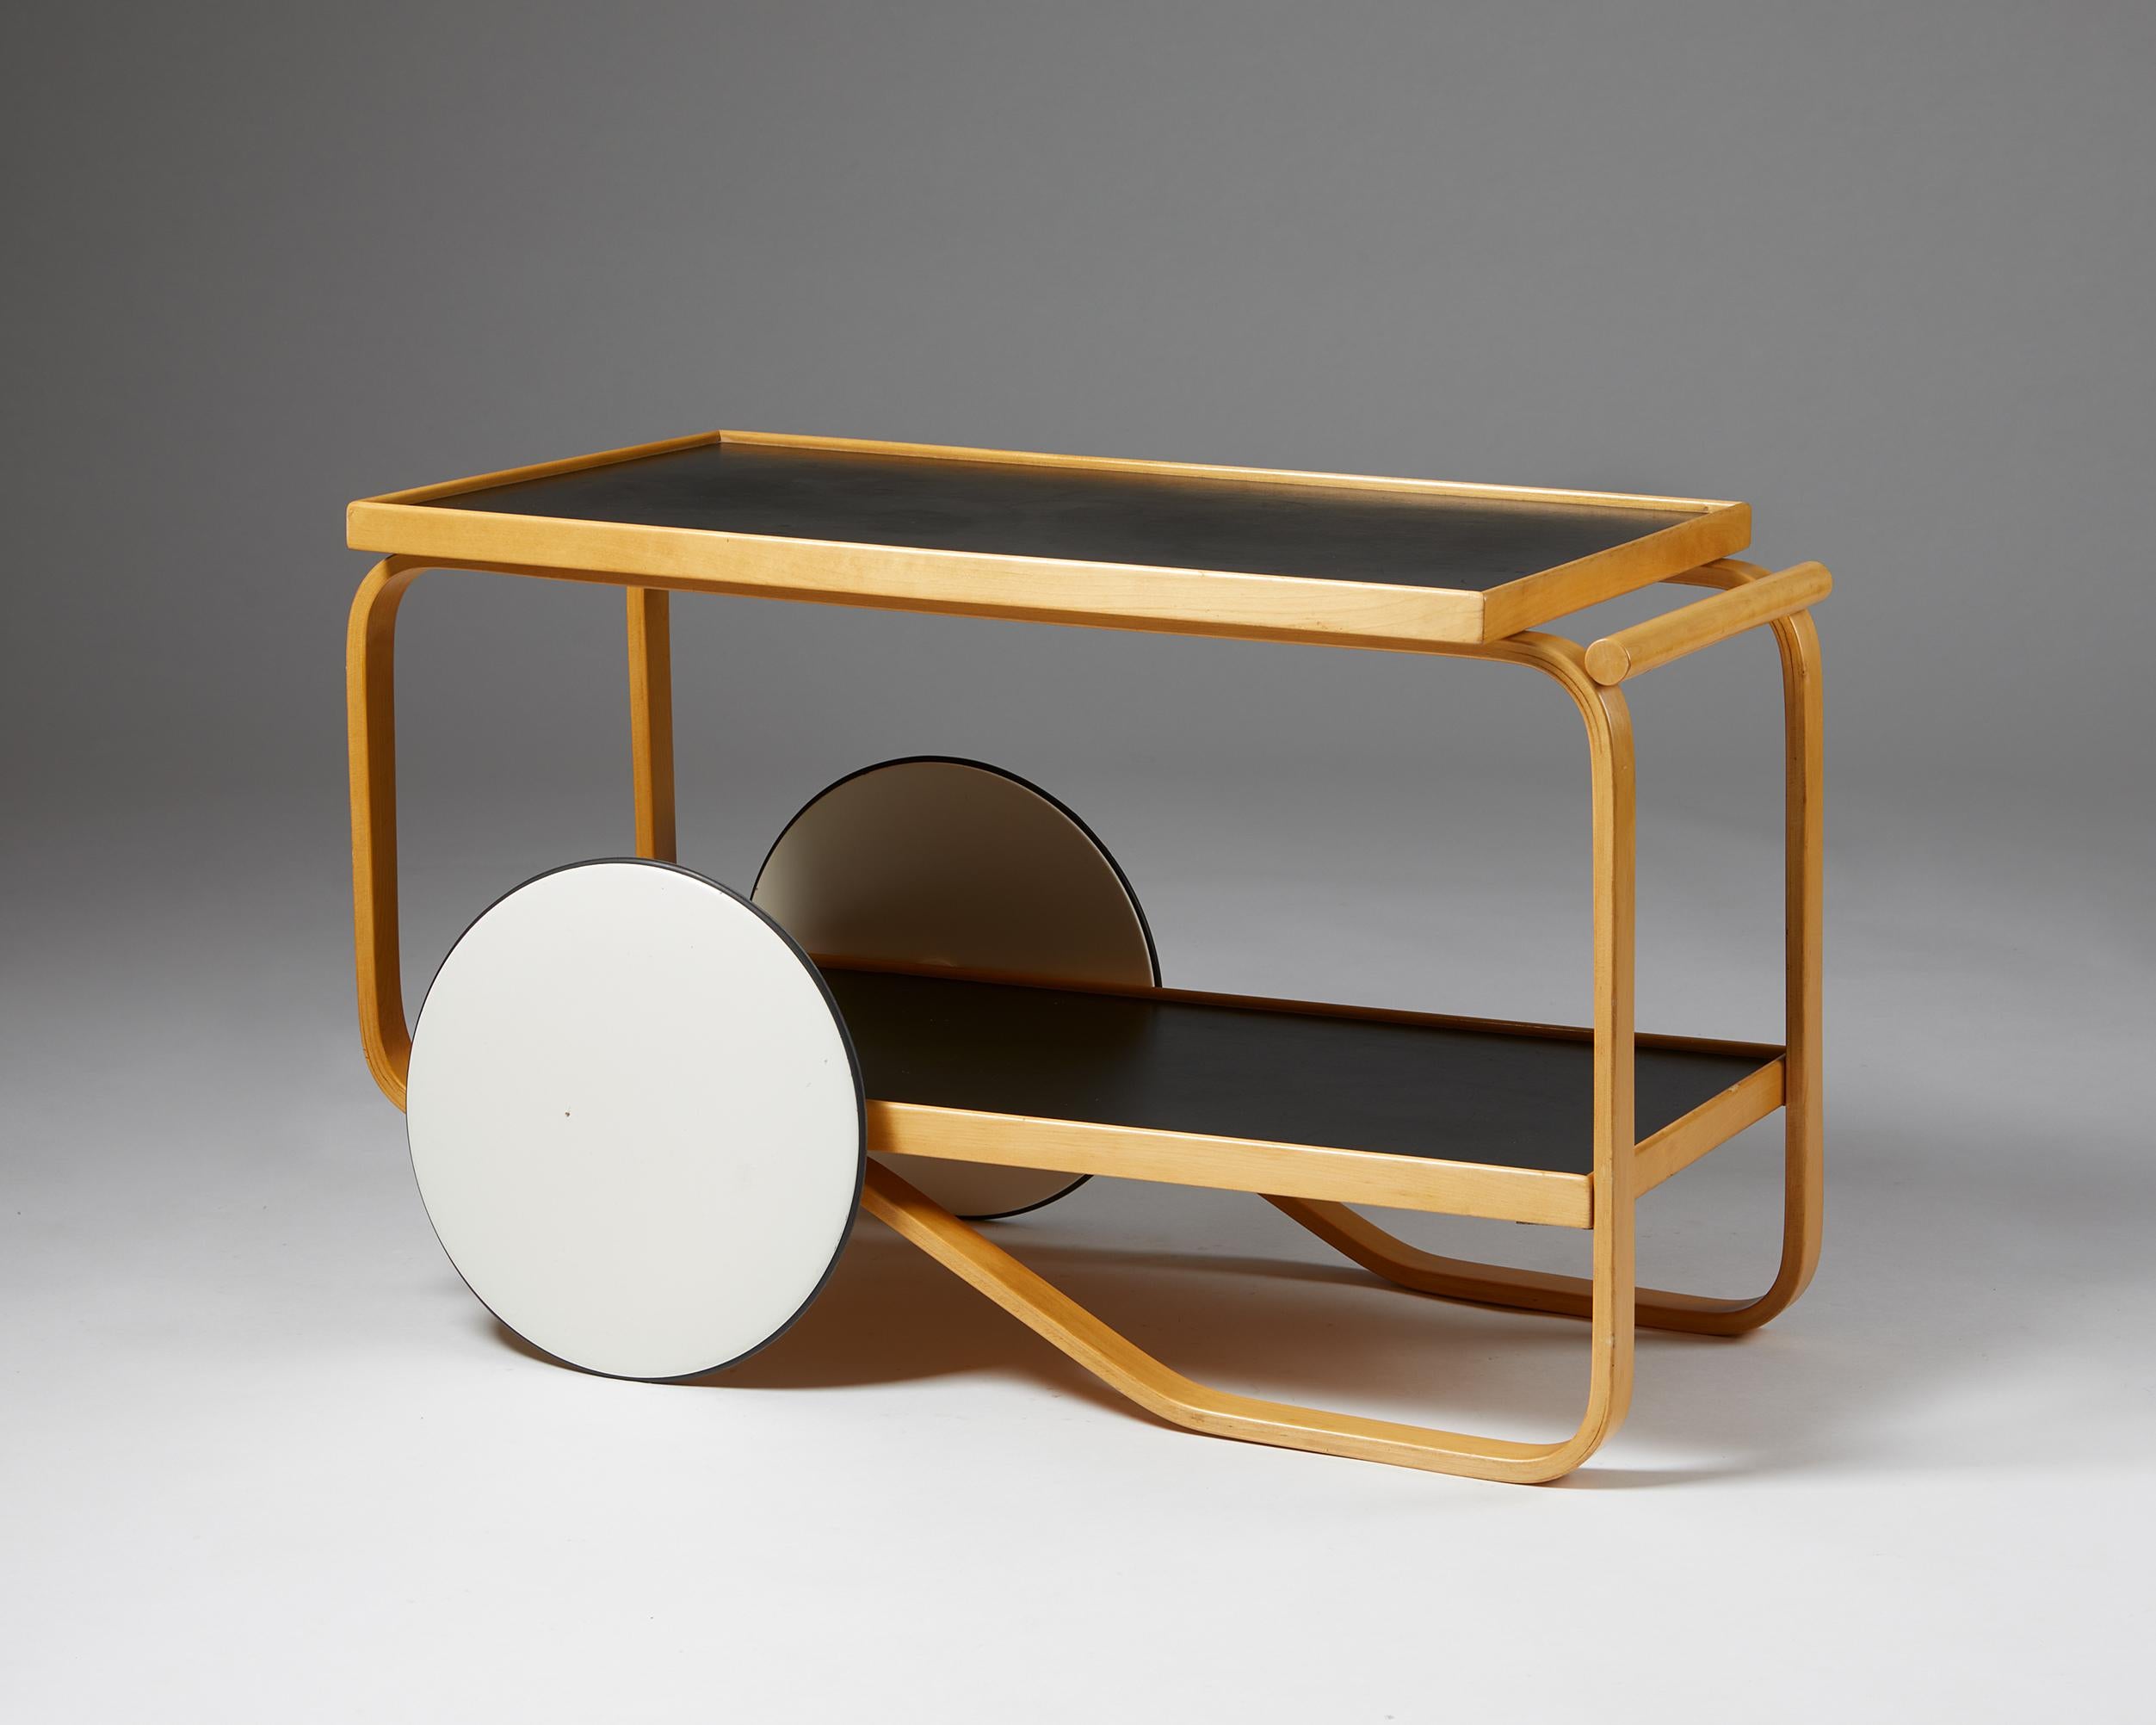 Trolley ‘model 901’ designed by Alvar Aalto for Artek,
Finland. 1950s.
Birch frame, black linoleum shelving, and white lacquered wooden wheels.

This rare trolley 